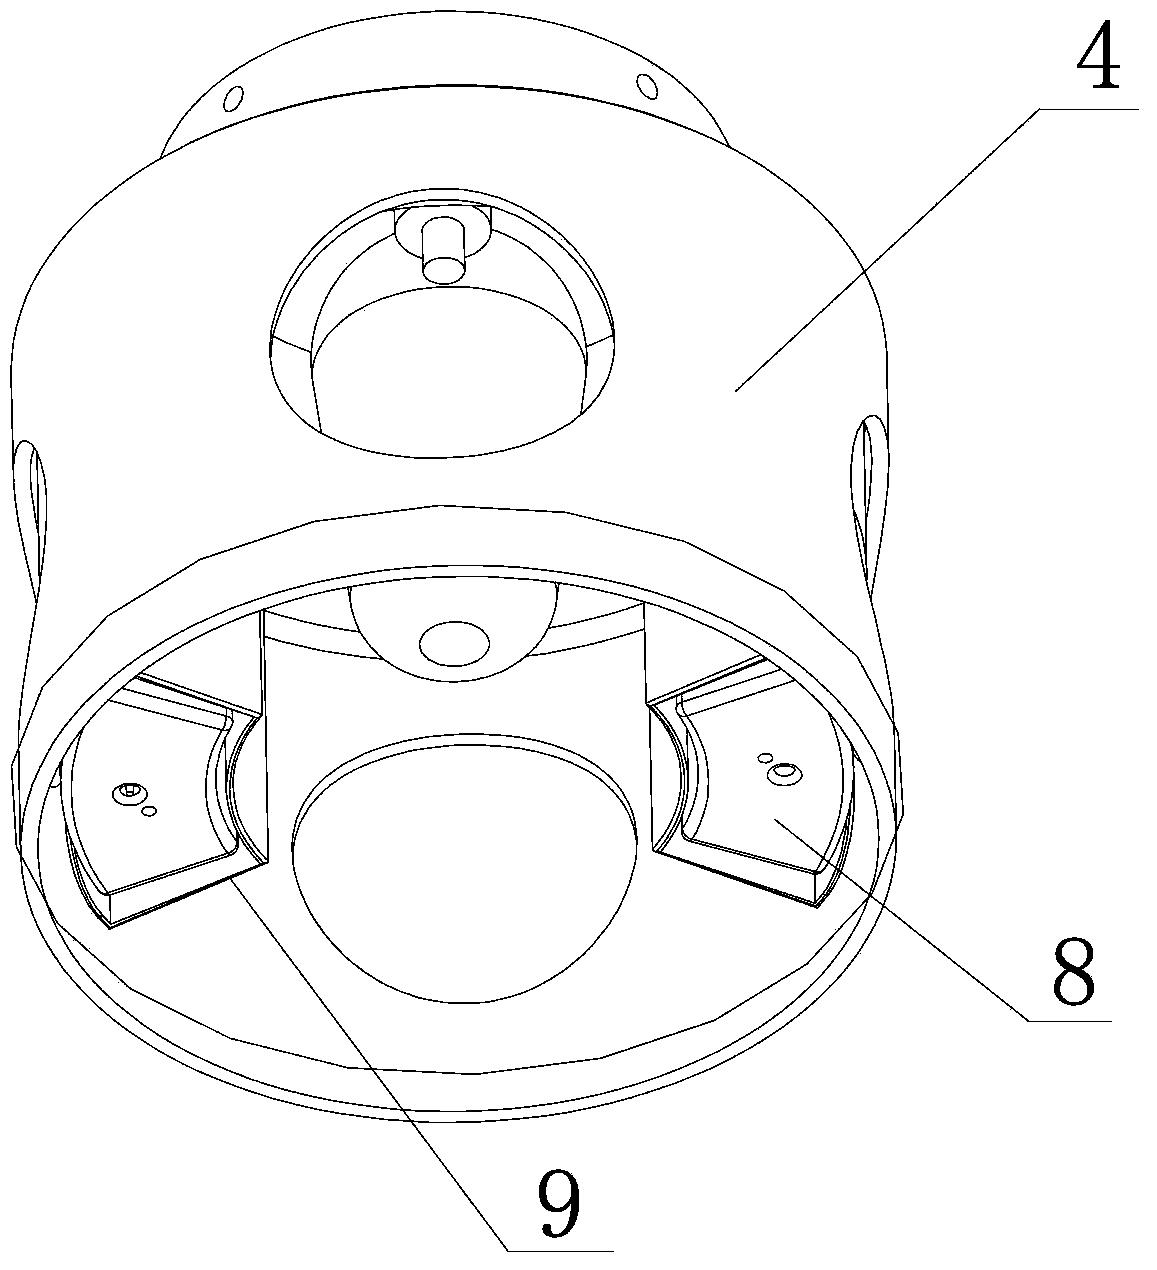 Load rejection device for underwater equipment